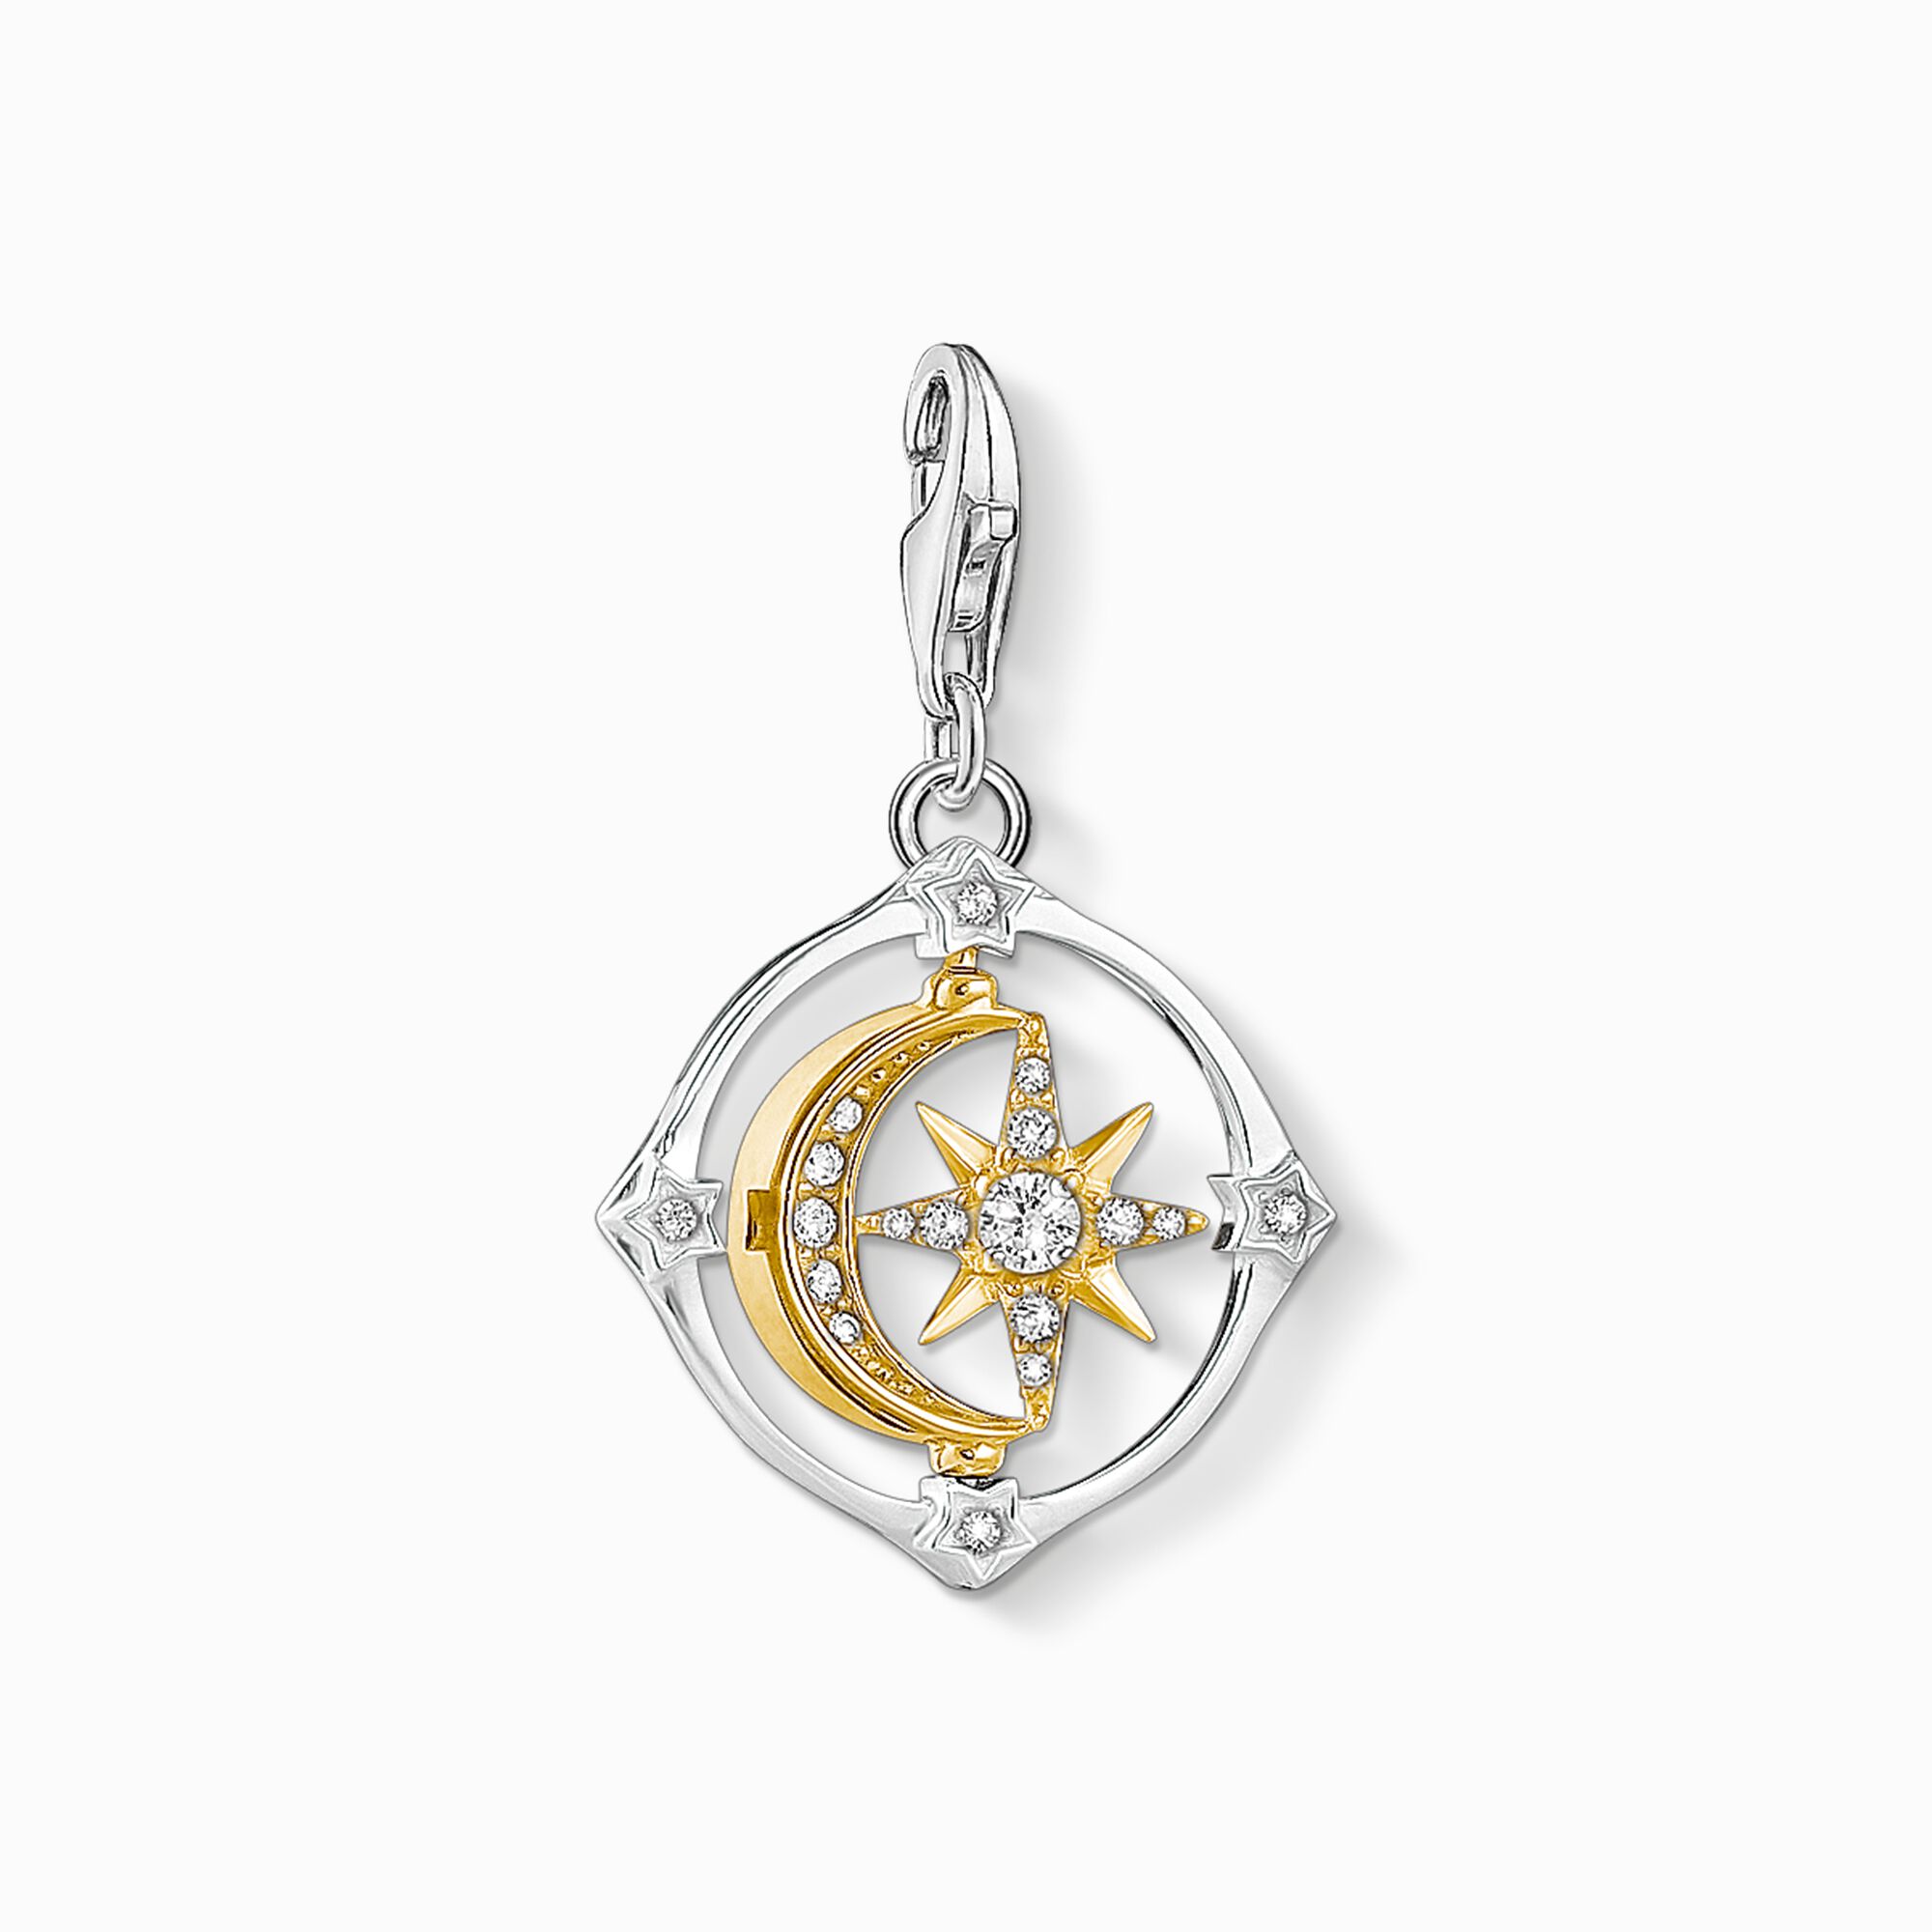 Charm pendant moveable moon and star from the Charm Club collection in the THOMAS SABO online store